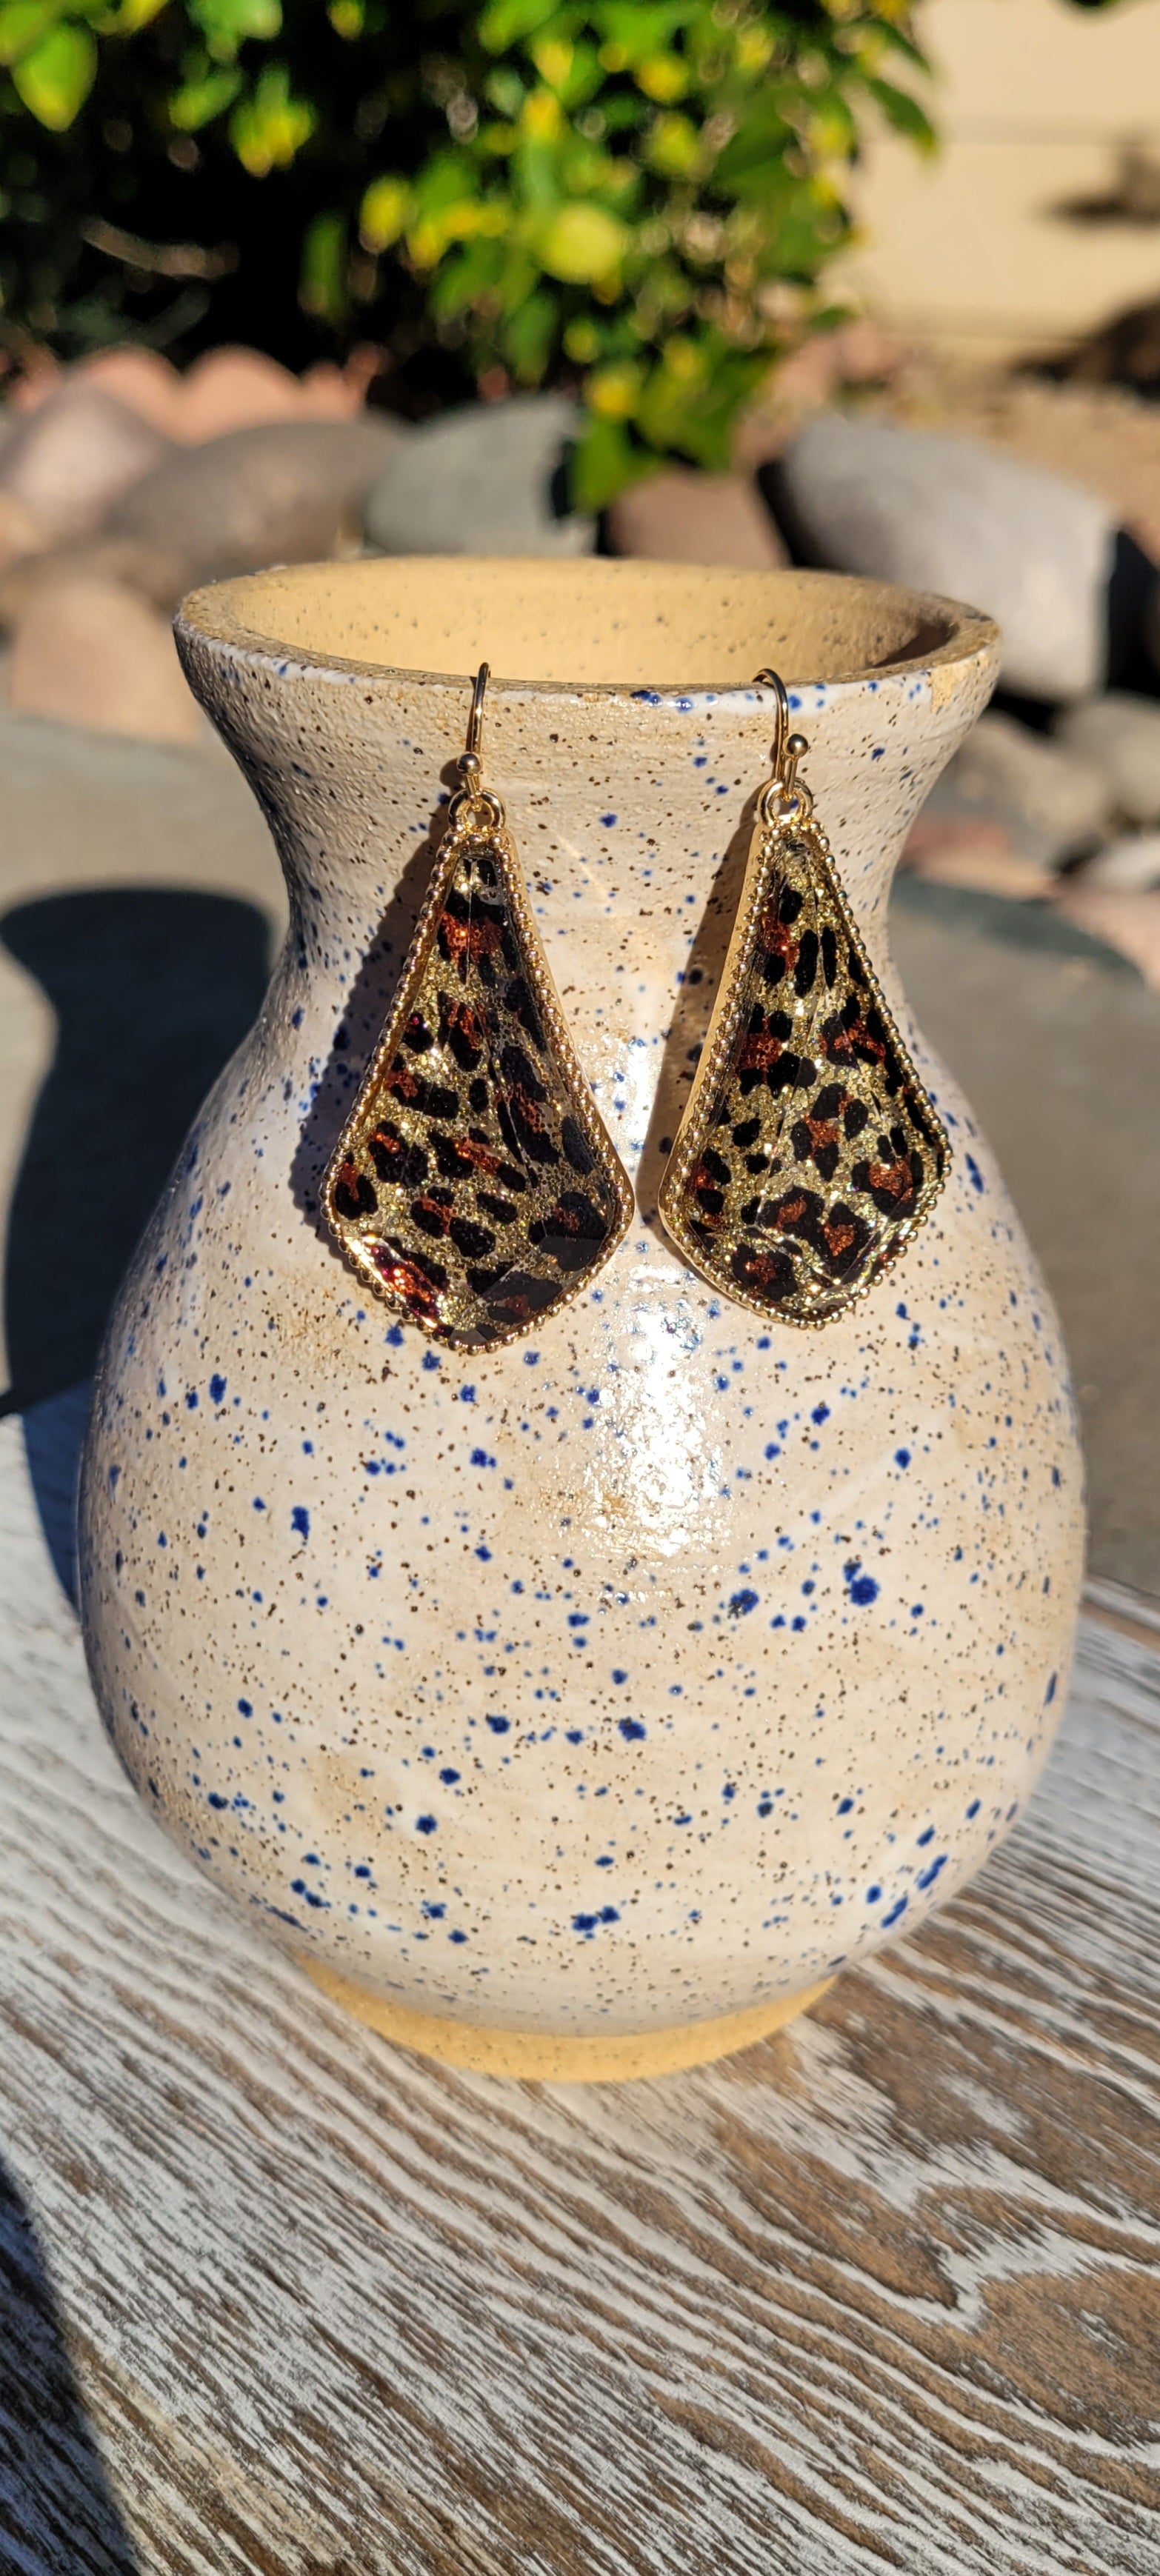 Genie bottle shape Leopard print Gold glitter Epoxy material Brushed gold fish hook dangle earrings Rubber earring back Length 2”, width 1” Whether you want to be on the wild side or classy this earring set it will add a fun touch to your outfit